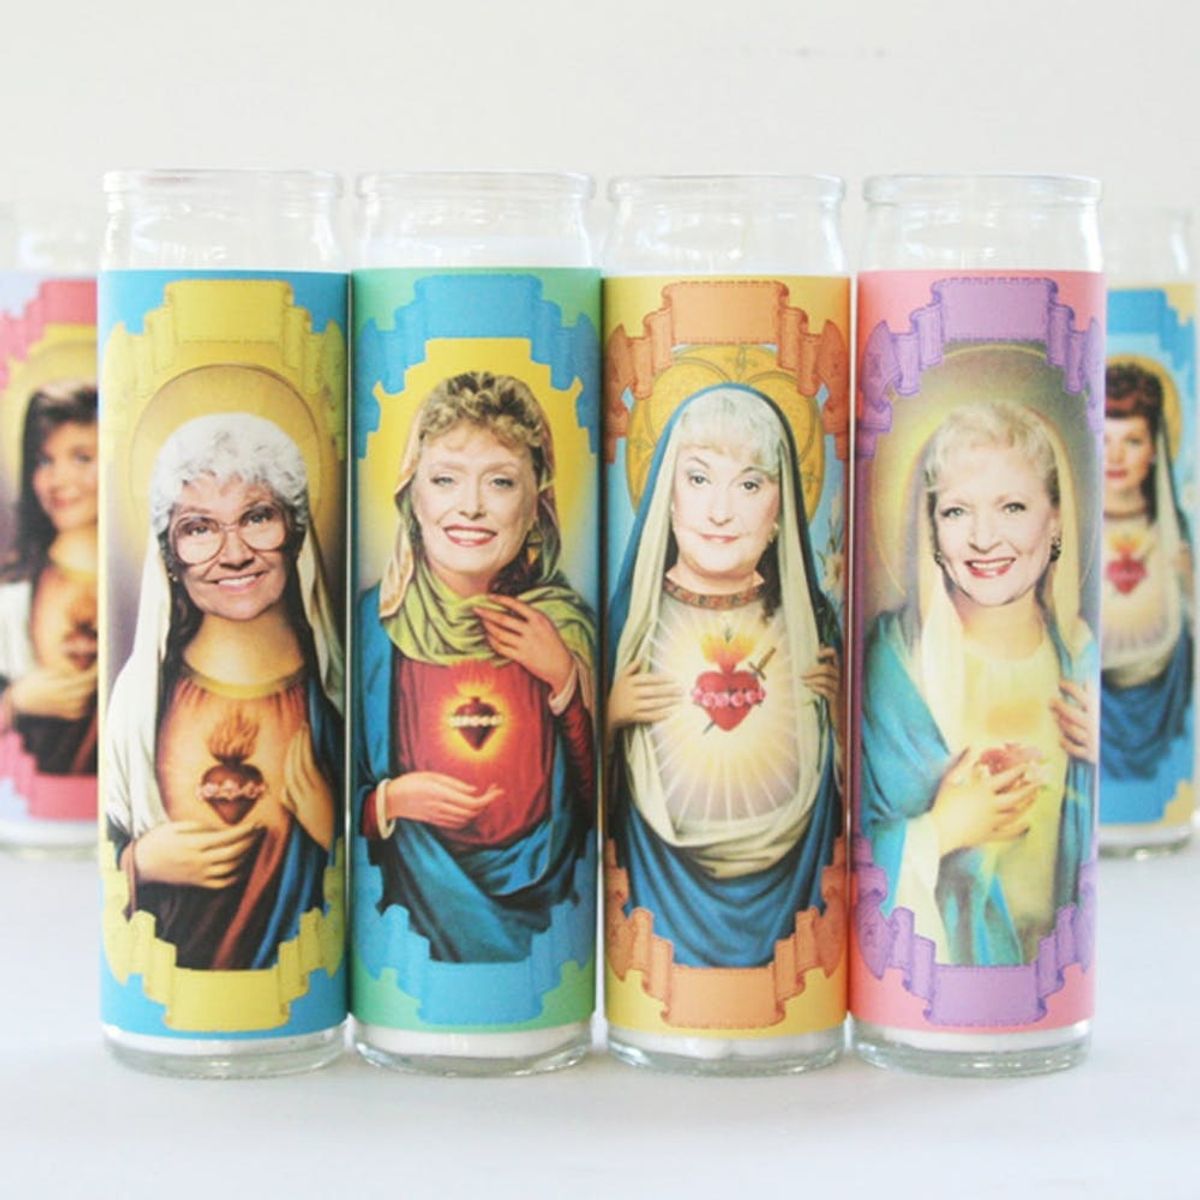 16 Goodies to Celebrate the Anniversary of The Golden Girls